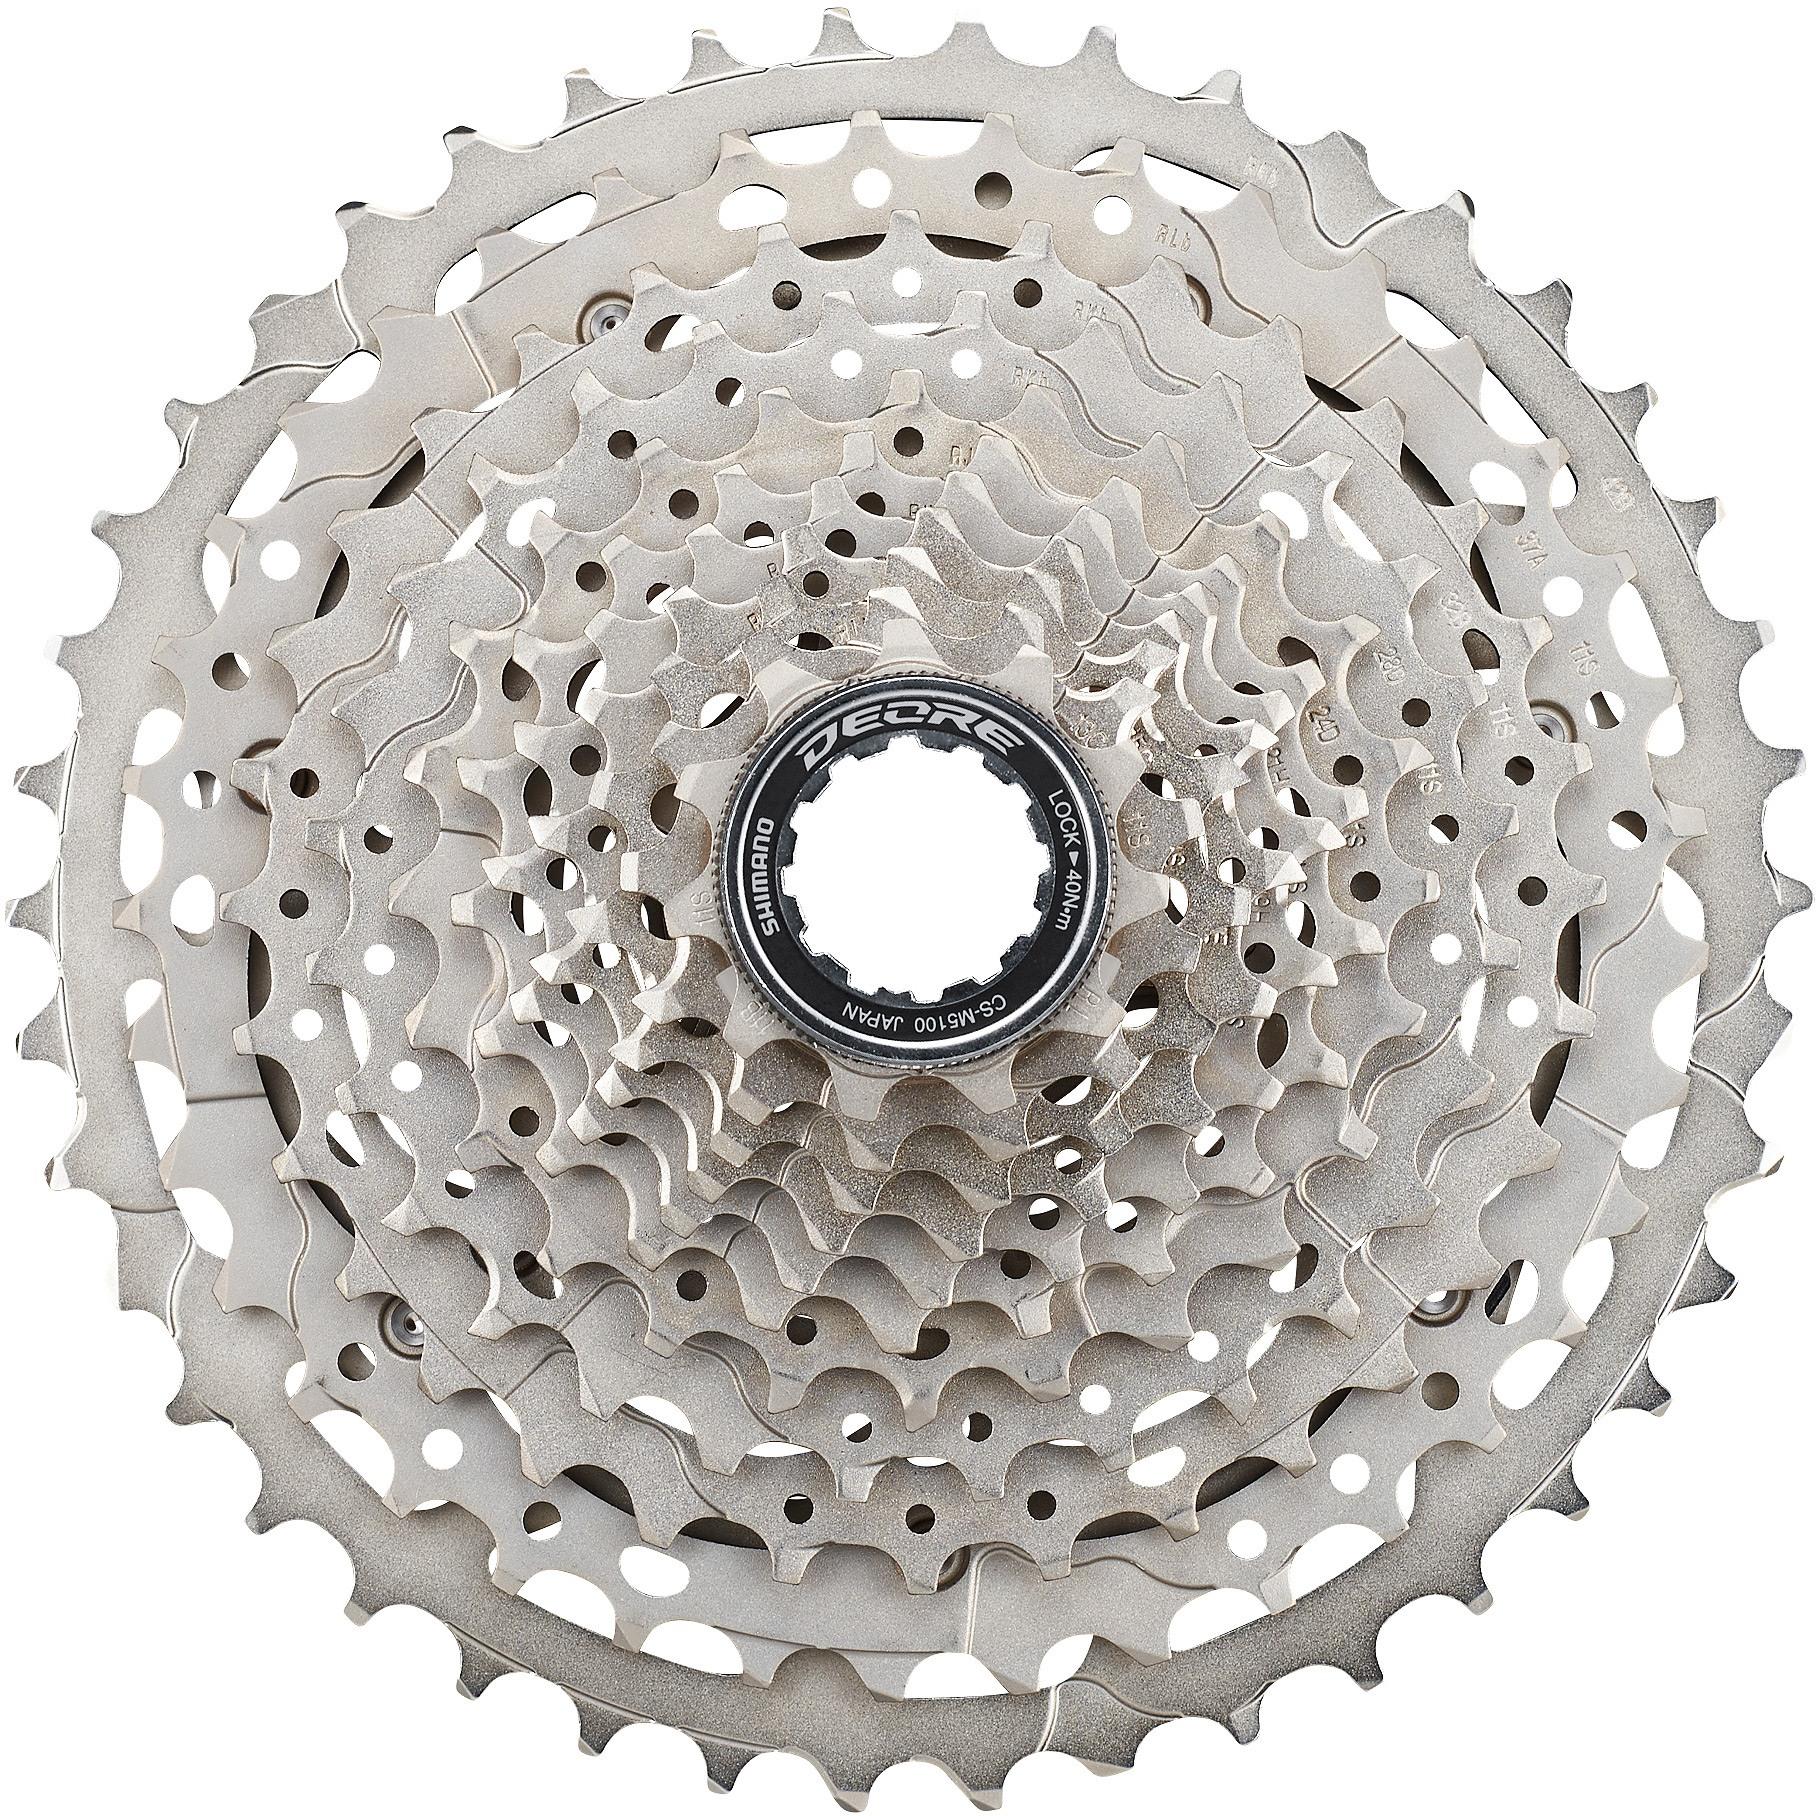 Shimano M5100 Deore 11 Speed Cassette - Silver